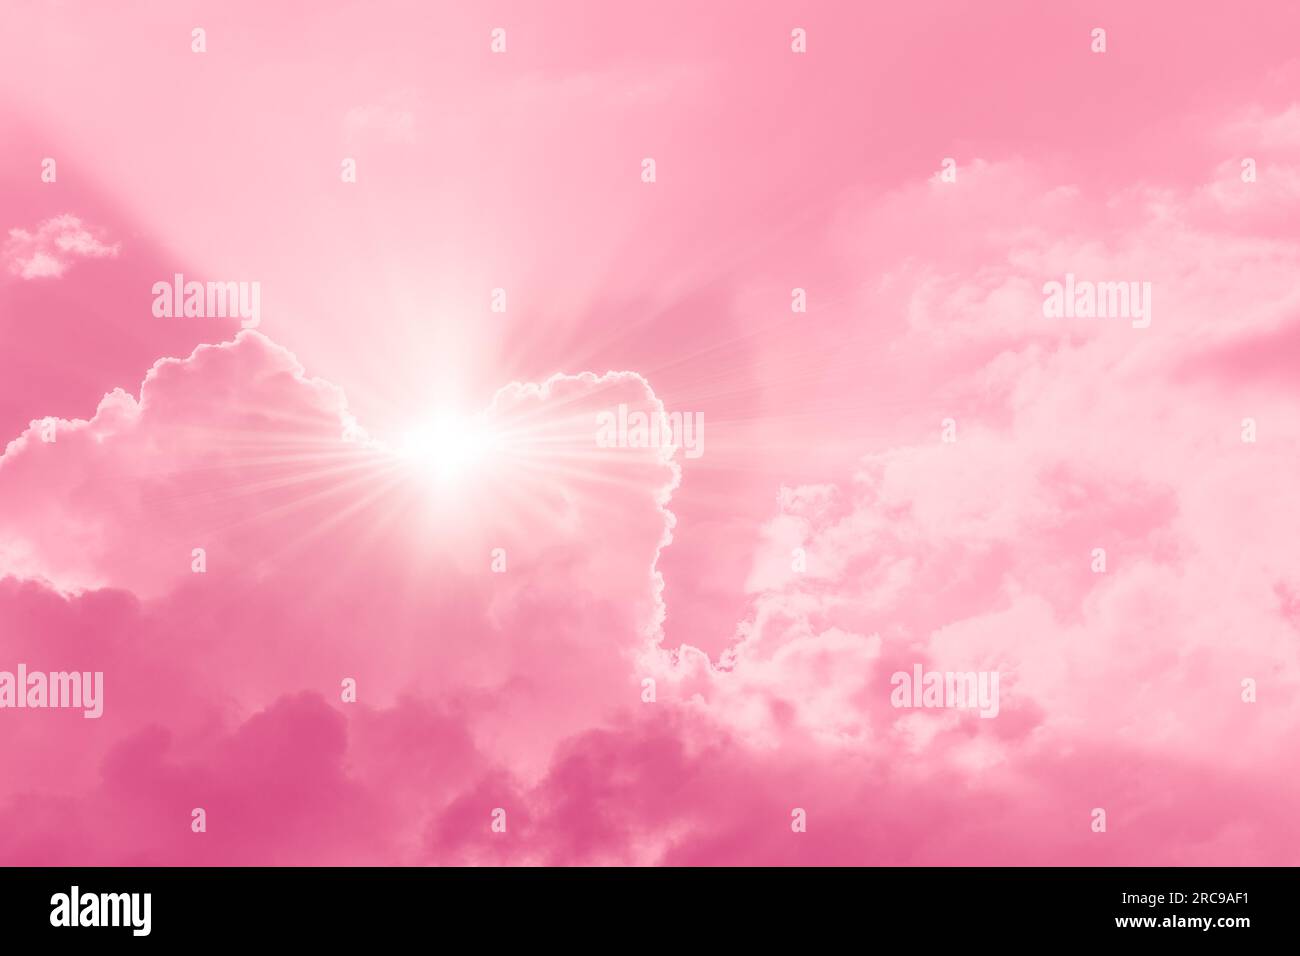 pink sky love lovely sweet pinky lady bright sunny skyscape for wedding postcard background Stock Photo